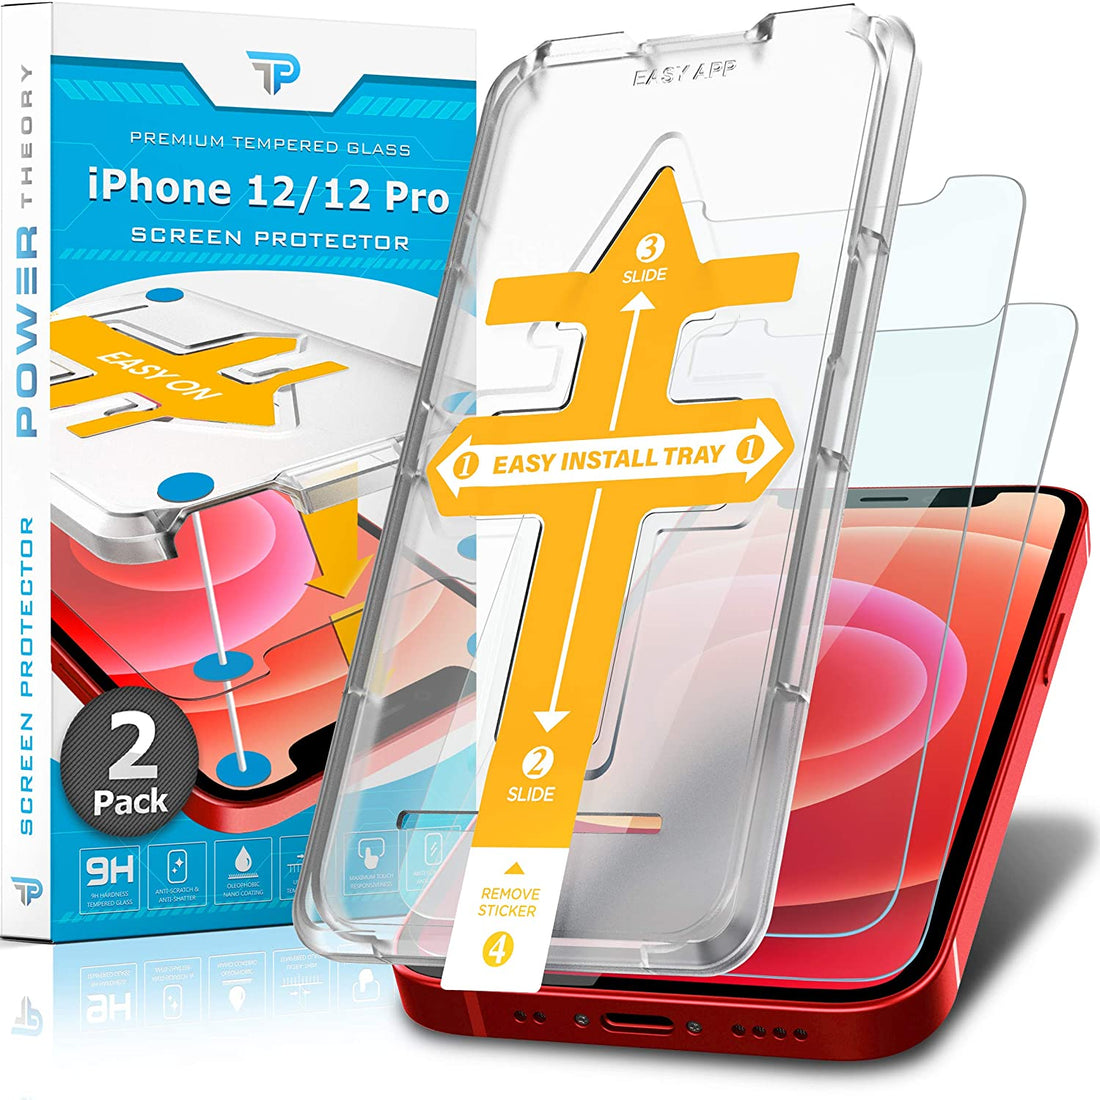 iPhone 12 Pro / iPhone 12 Tempered Glass Screen Protector [2-Pack] – Power  Theory